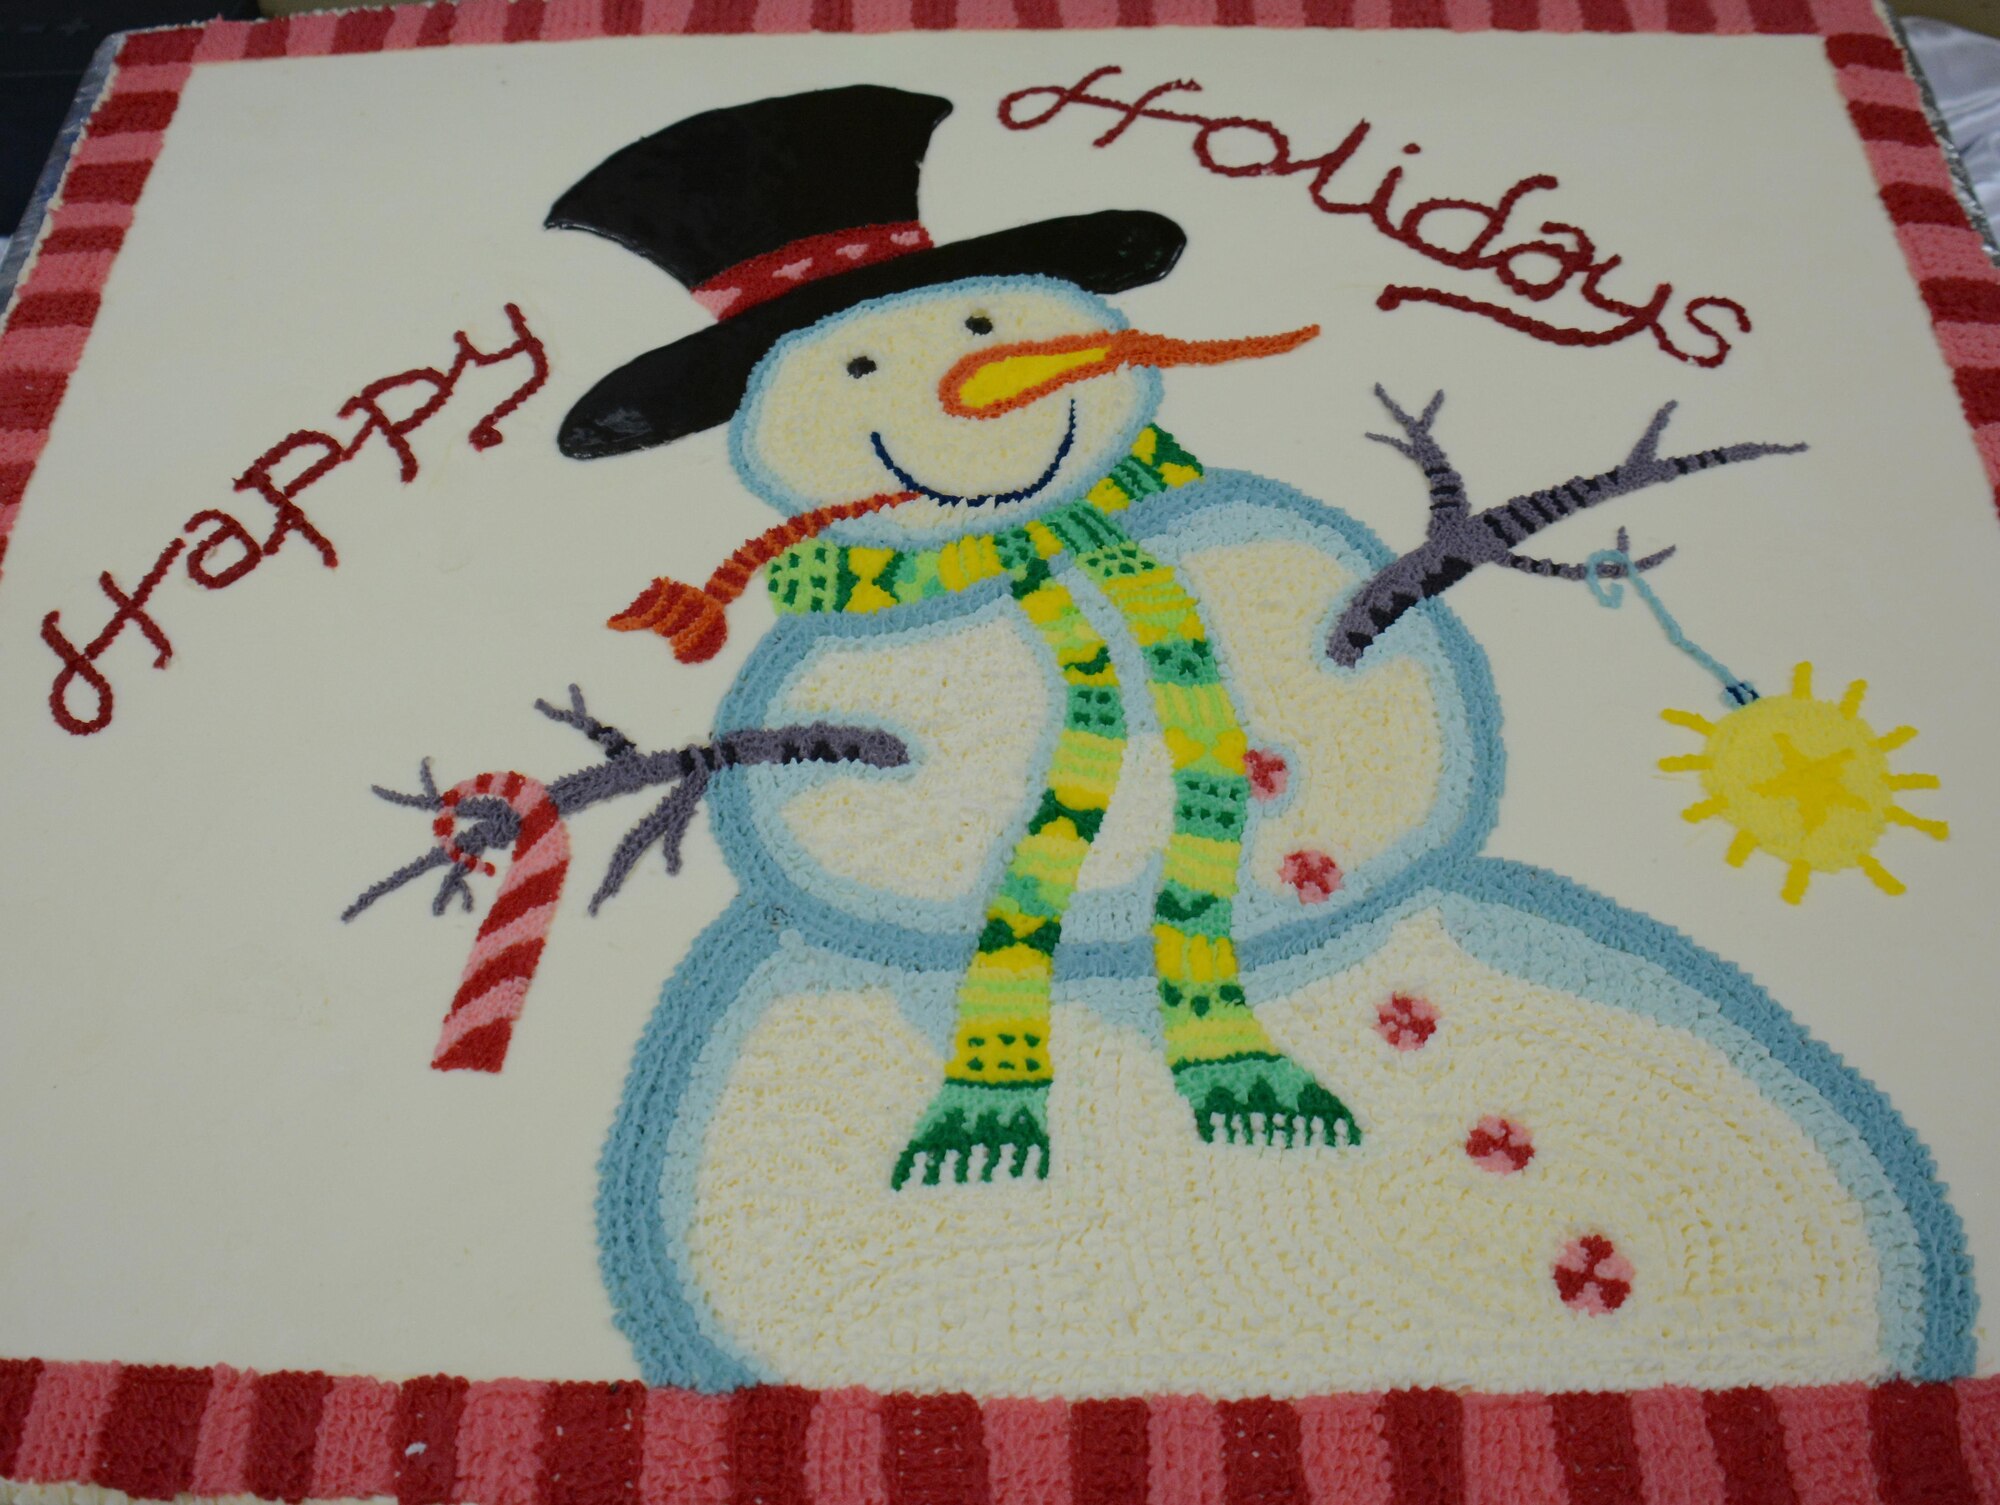 A cake decorated with a snowman is displayed inside the Independence Dining Facility at Al Udeid Air Base, Qatar Dec. 25. The cake was one of three offered for desert to the hundreds of service members who attended the holiday lunch on Christmas day. The holiday menu included lobster, turkey and a variety of deserts including pie and ice cream. (U.S. Air Force photo by Tech. Sgt. James Hodgman/Released)